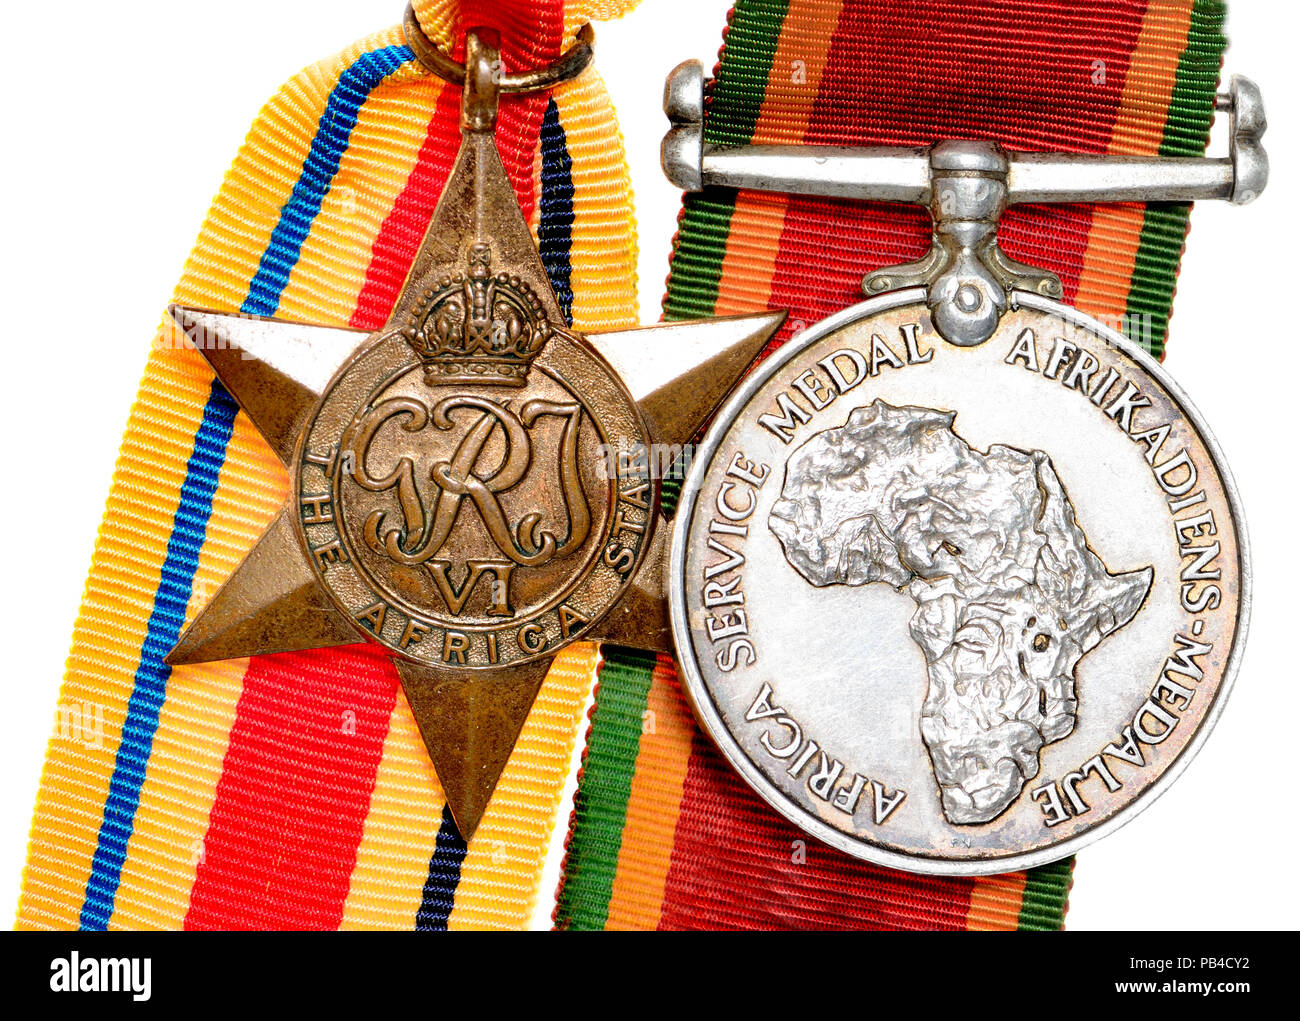 The Africa Star and Africa Service medals. Stock Photo